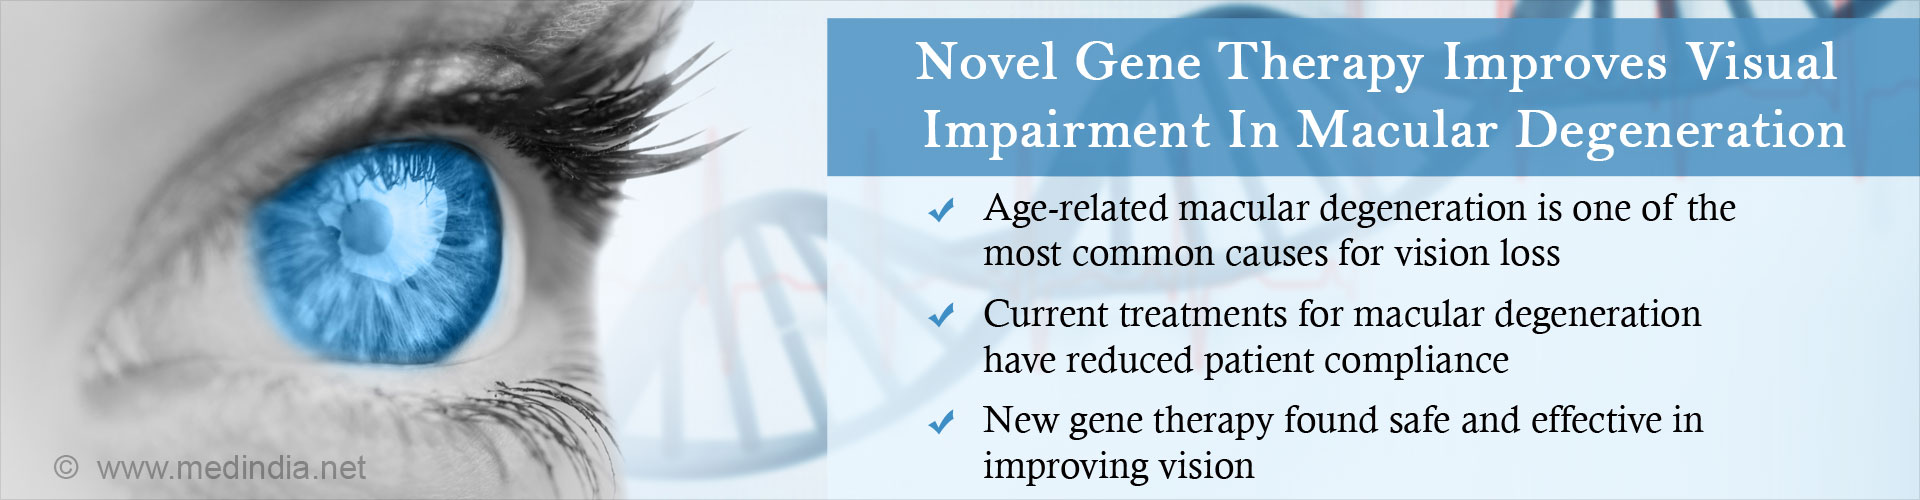 Novel gene therapy improves visual impairment in macular degeneration
- age-related macular degeneration is one of the most common causes for vision loss
- current treatments for macular degeneration have reduced patient compliance
- New gene therapy found safe and effective